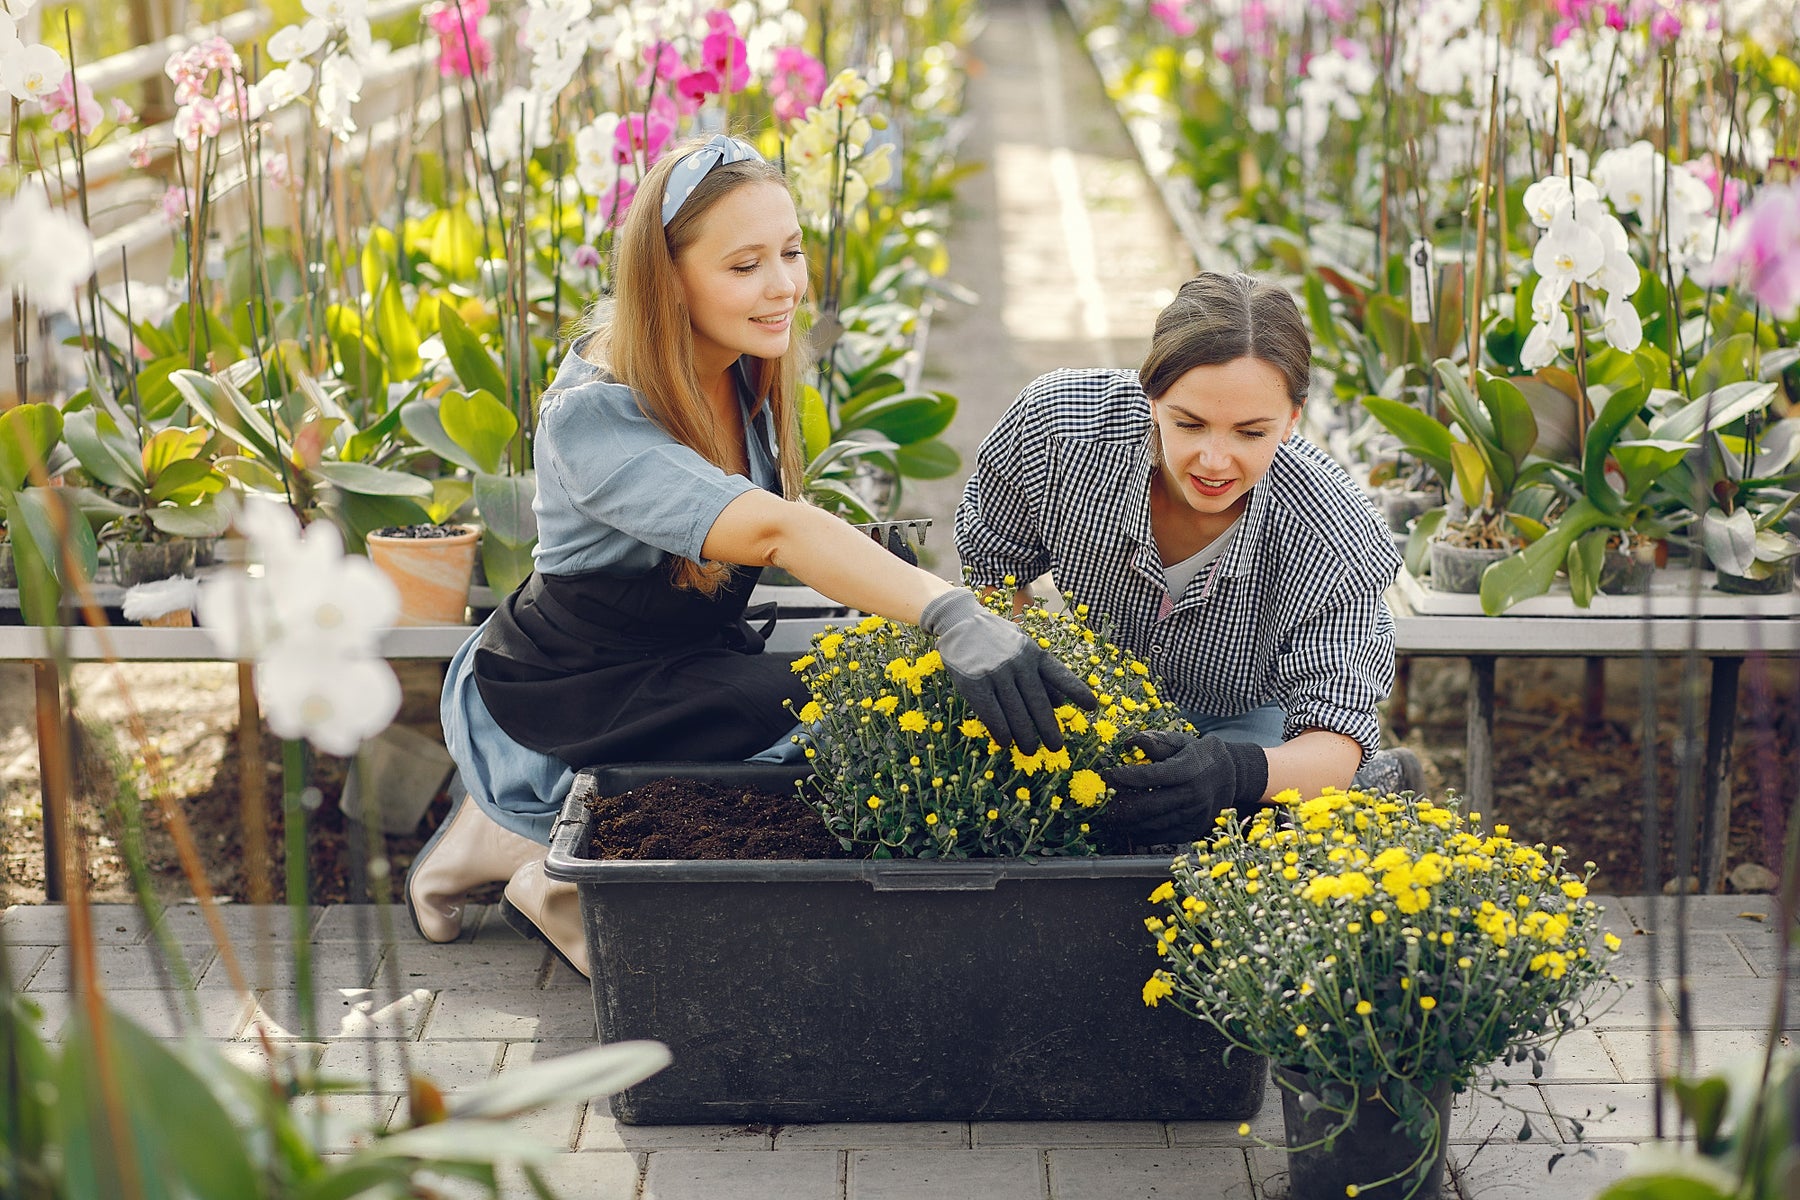 When is the Best Time to Plant Flowers?